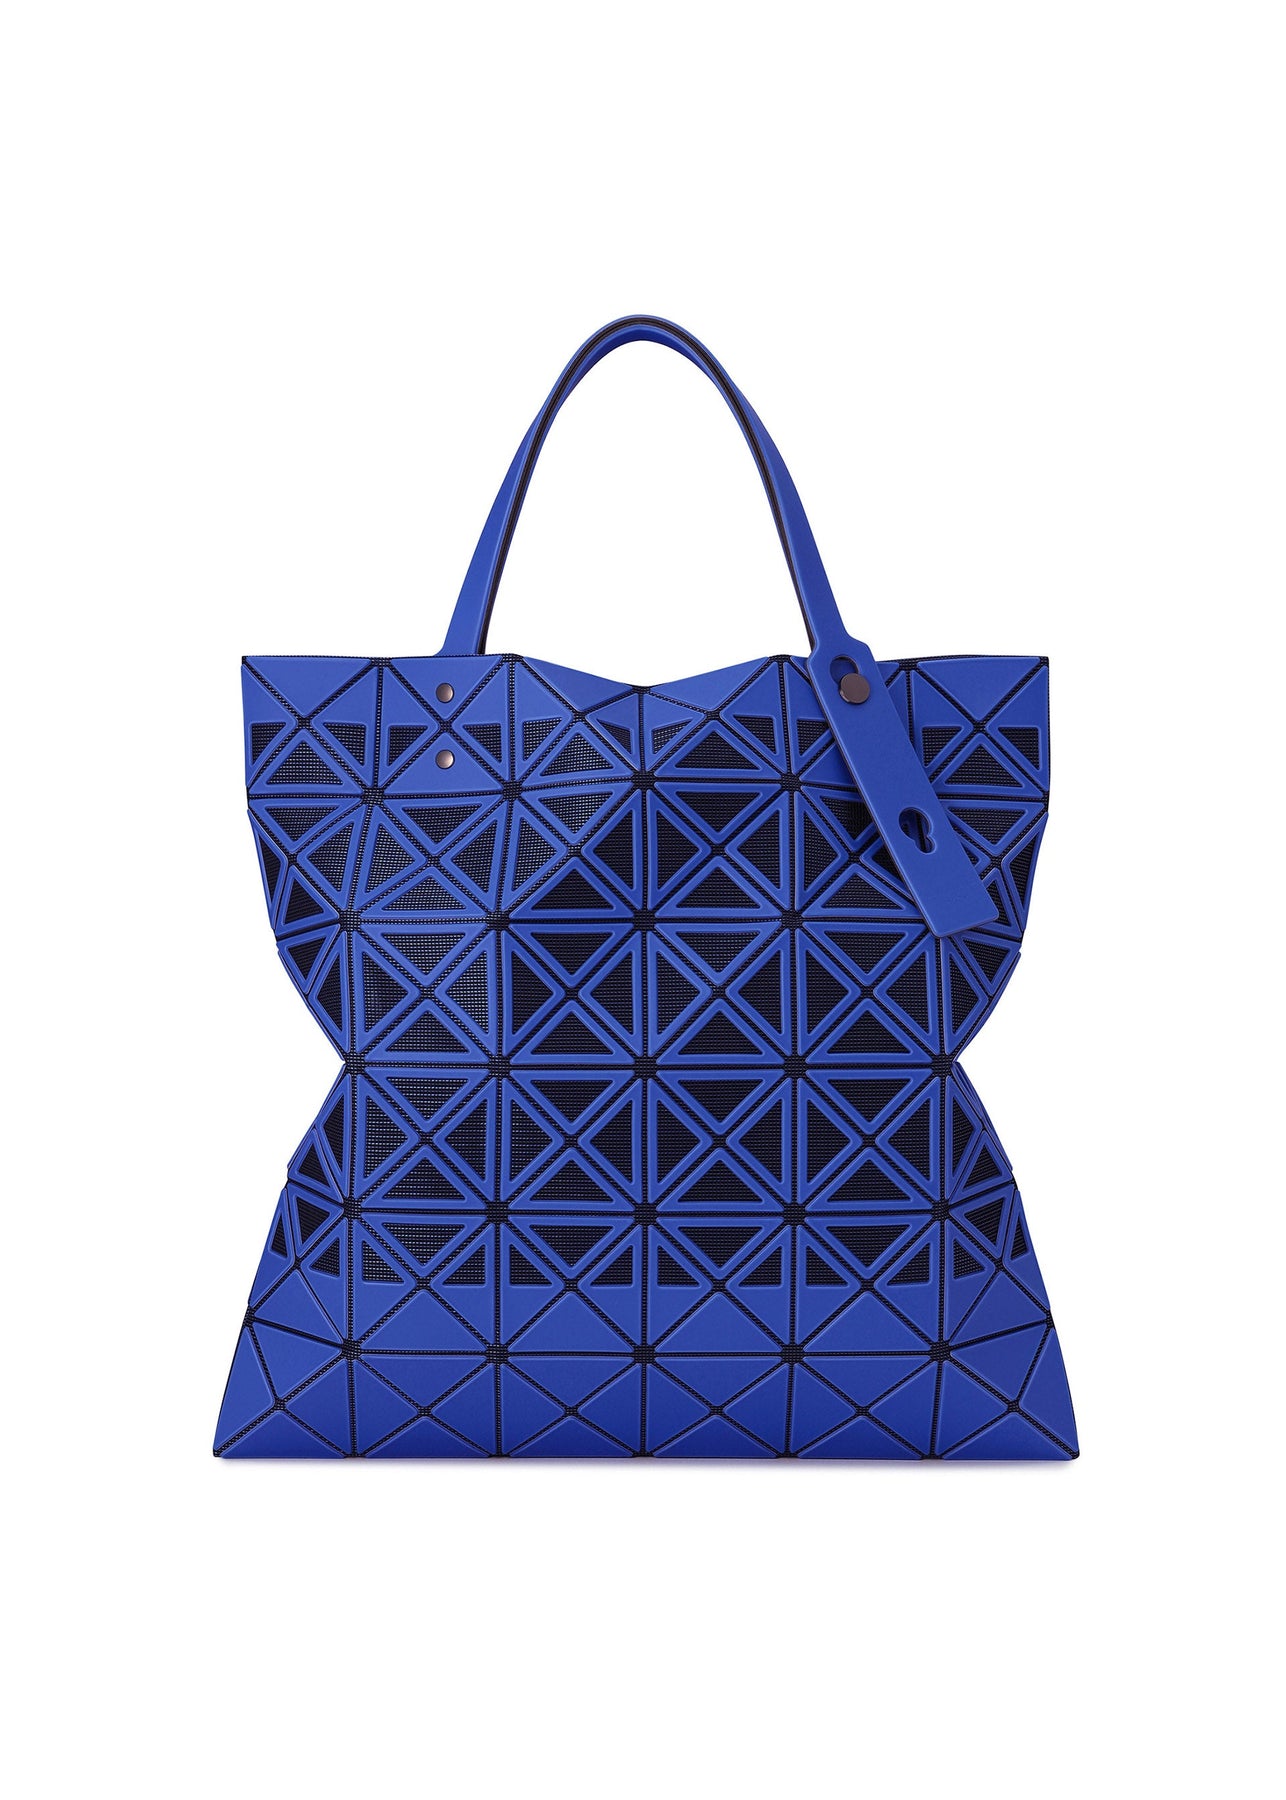 FRAME TOTE BAG, The official ISSEY MIYAKE ONLINE STORE